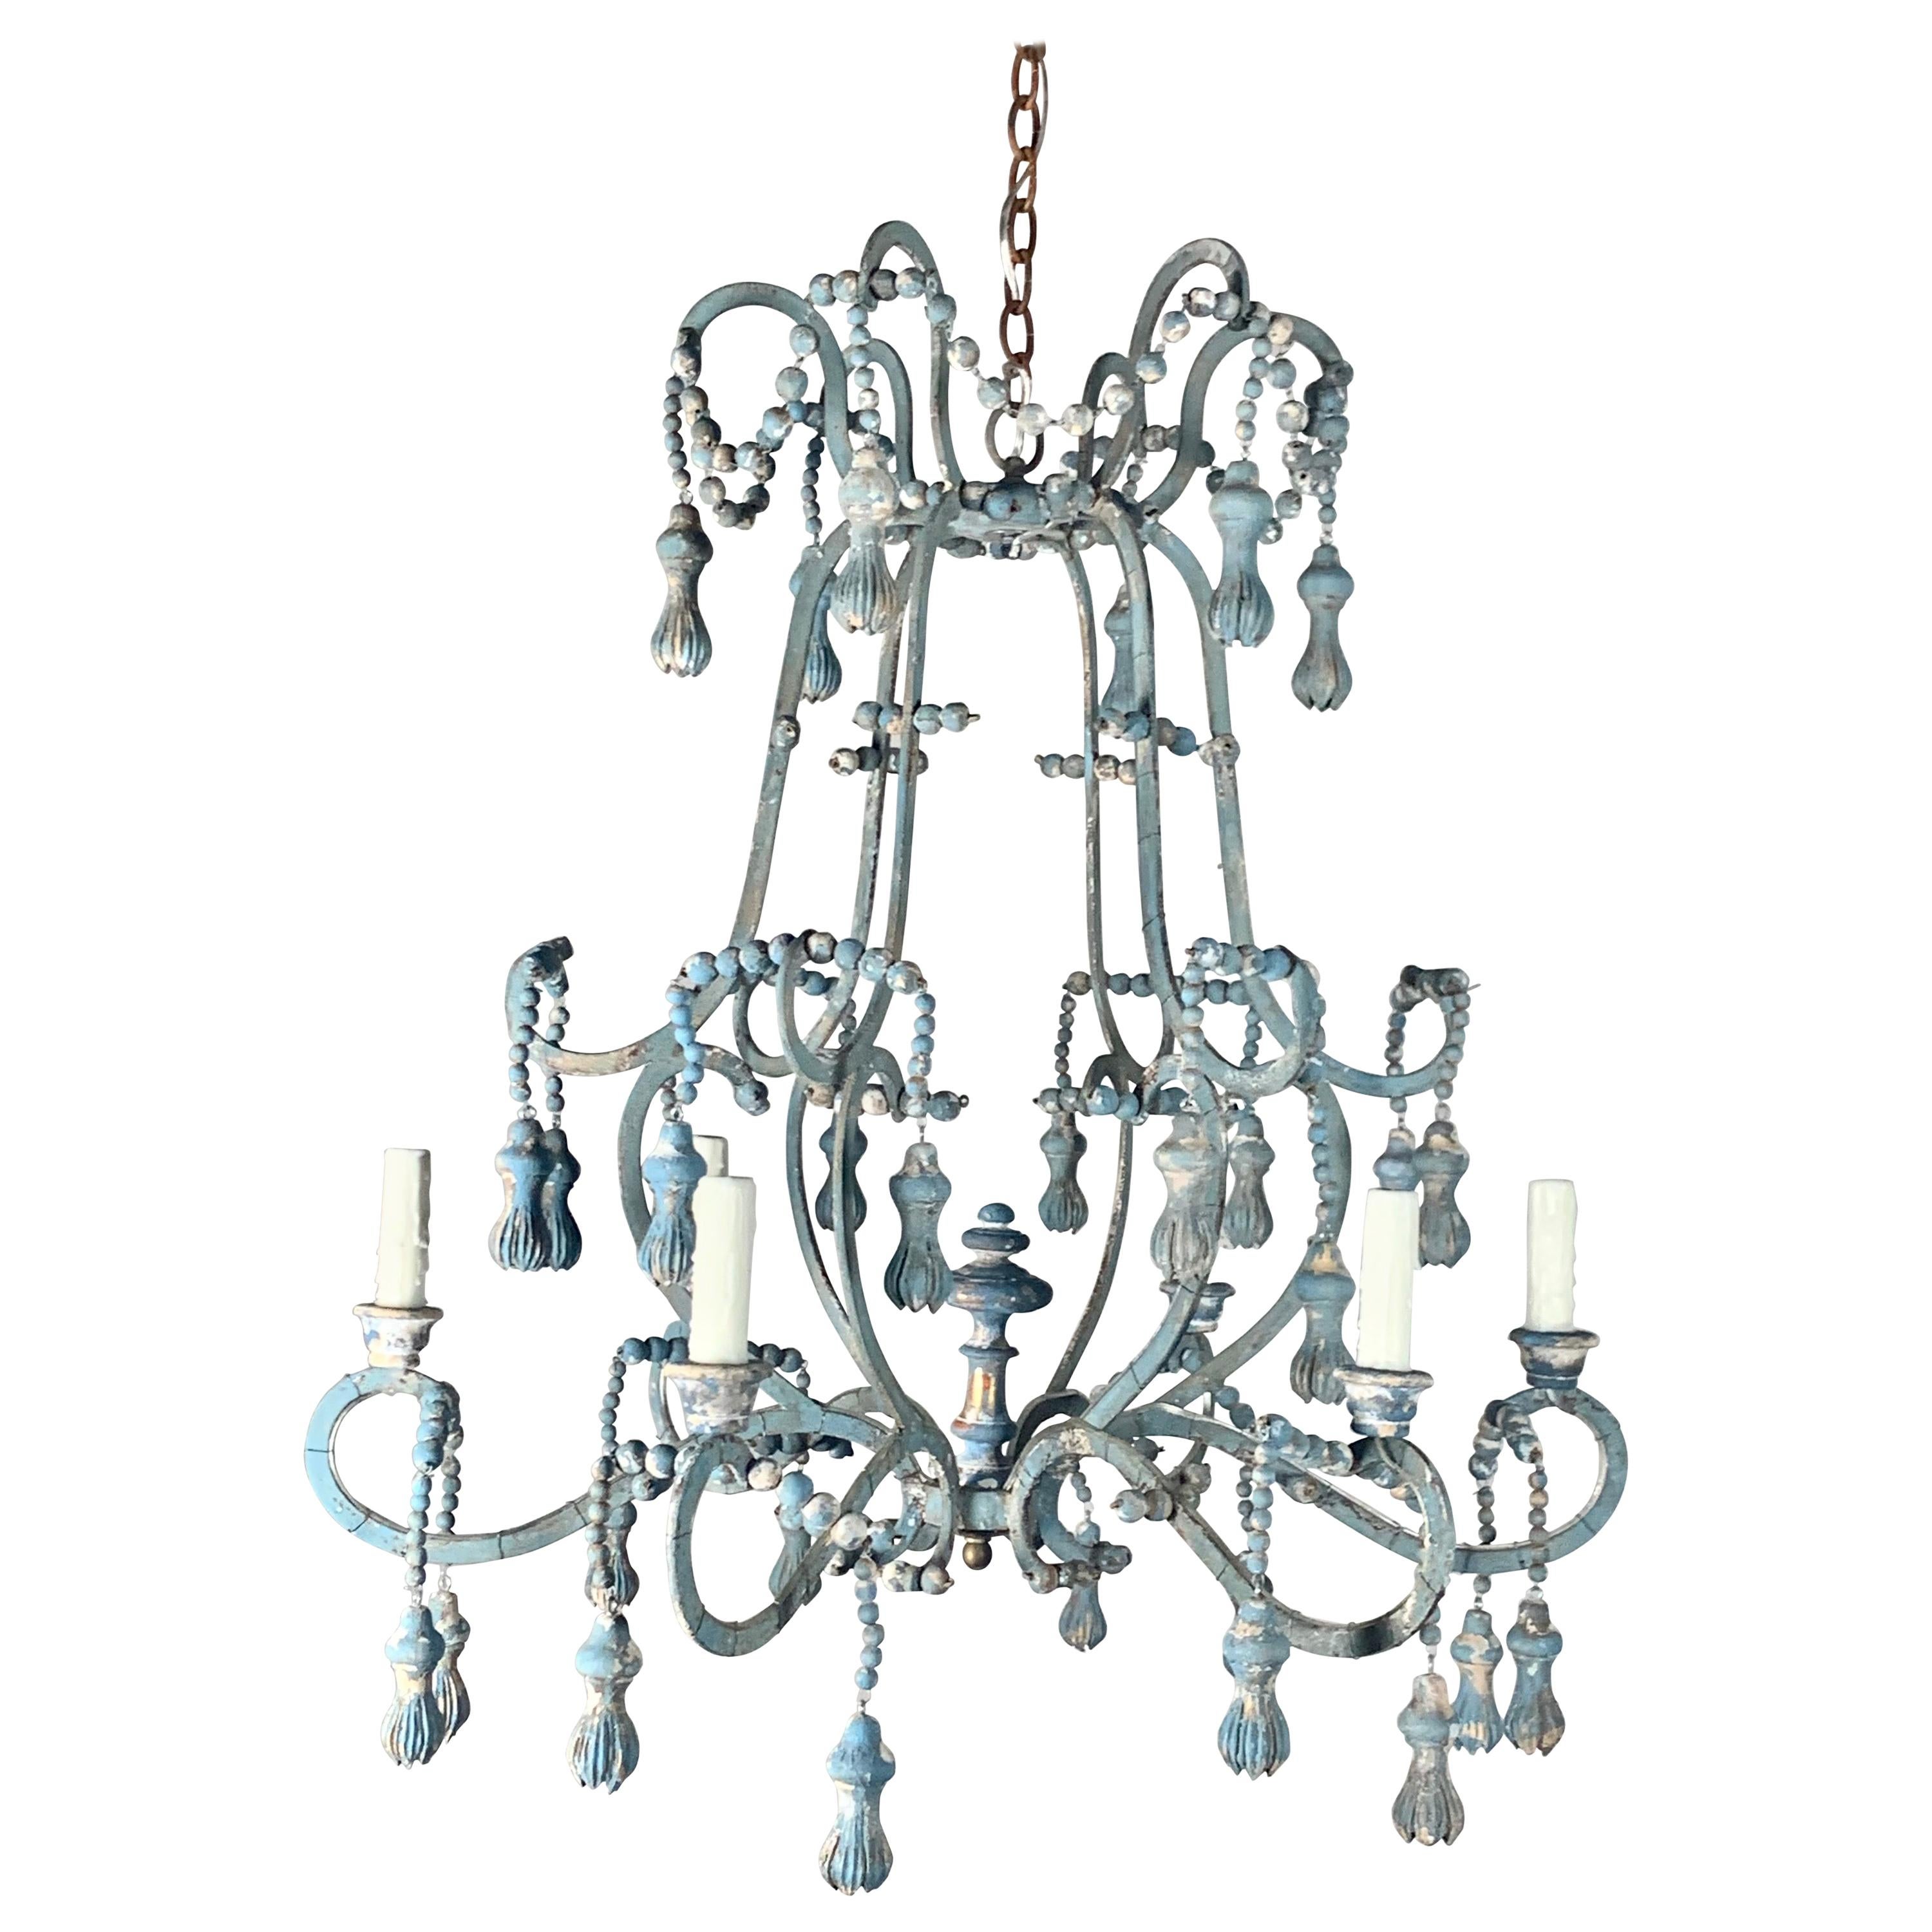 Painted Wood Beaded Chandelier by Melissa Levinson